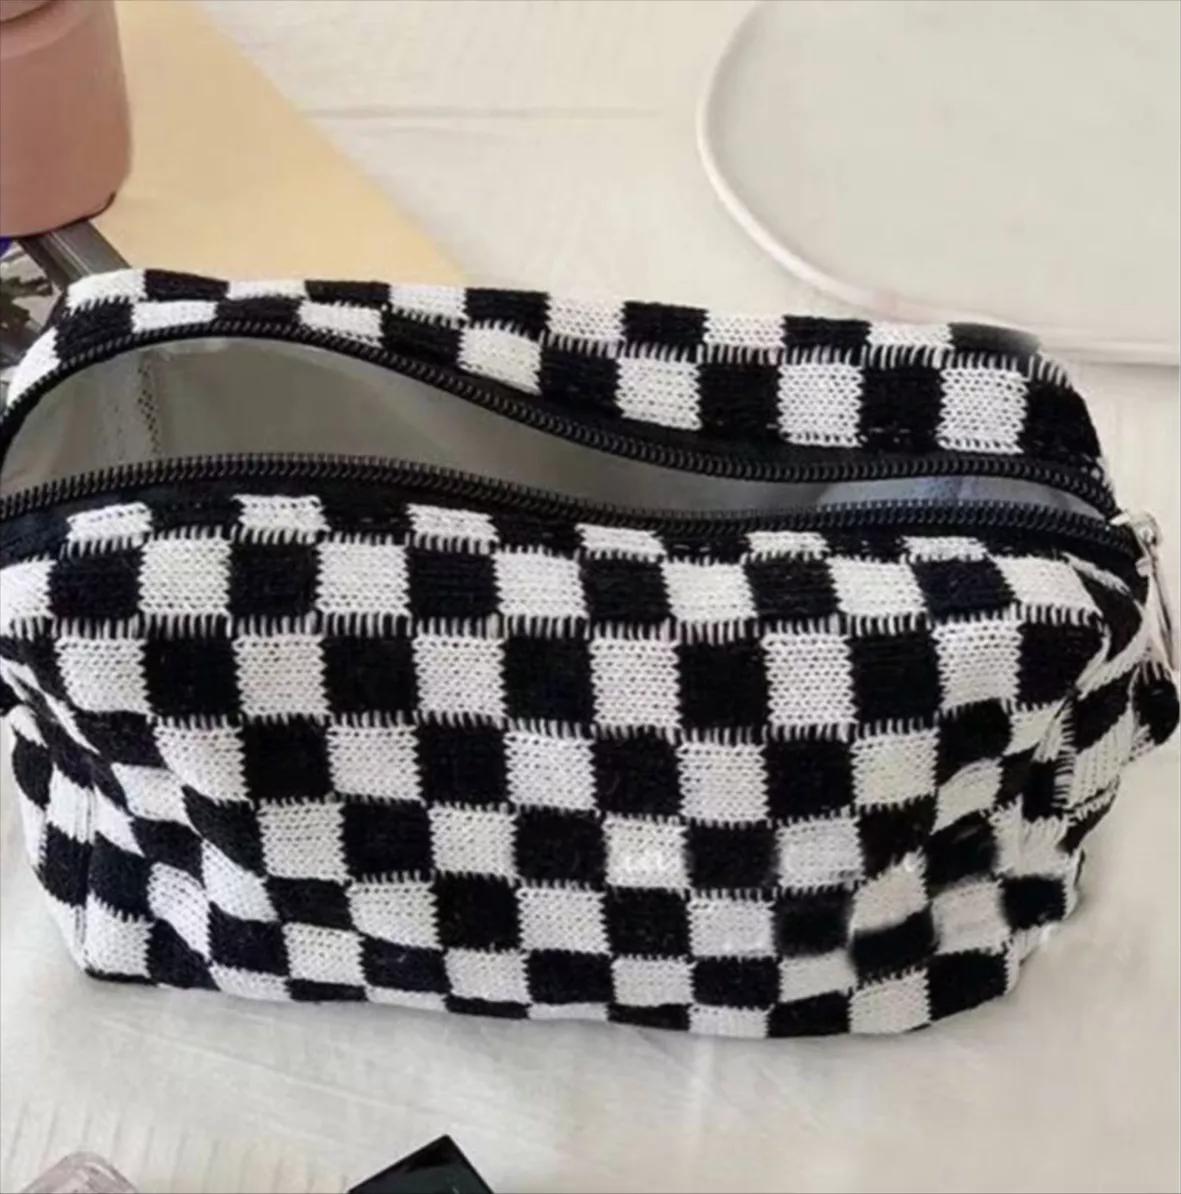 DANCOUR Small Makeup Bag for Purse, Small Pouch, Small Cosmetic Bag for Purse, Mini Makeup Bag, Period Bag, Nylon Bag, Small Makeup Pouch for Purse